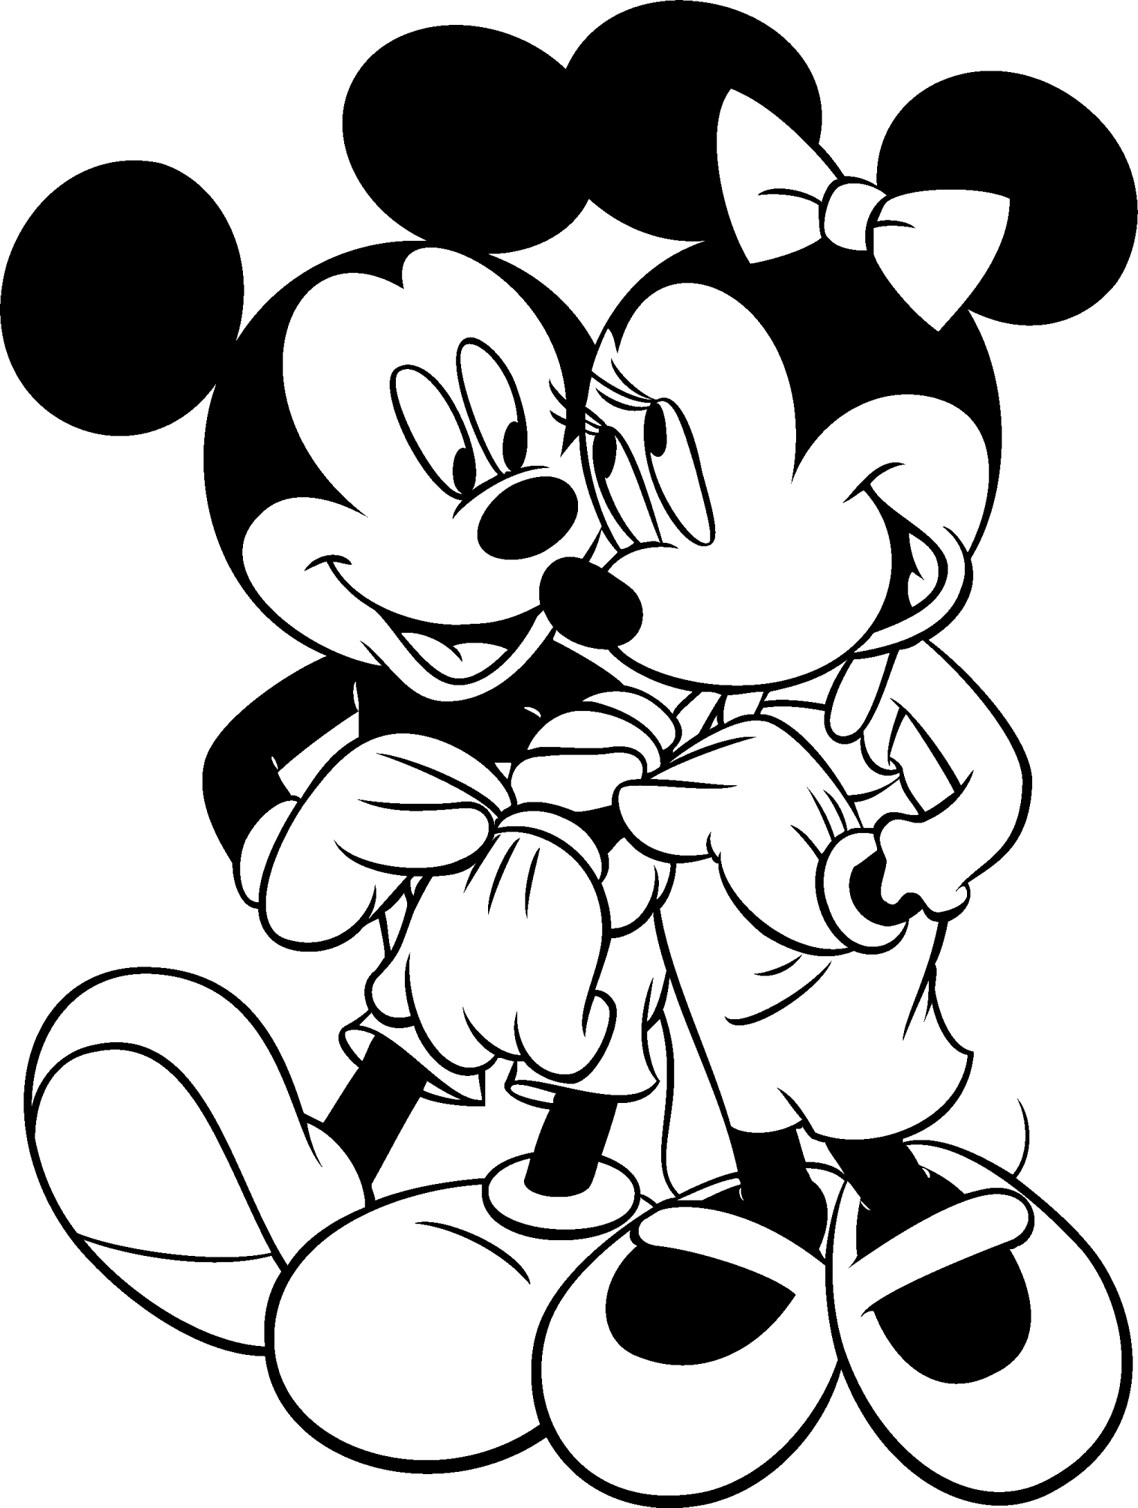 Mickey Mouse Coloring Pages For Toddlers
 Mickey Mouse Coloring Pages 2